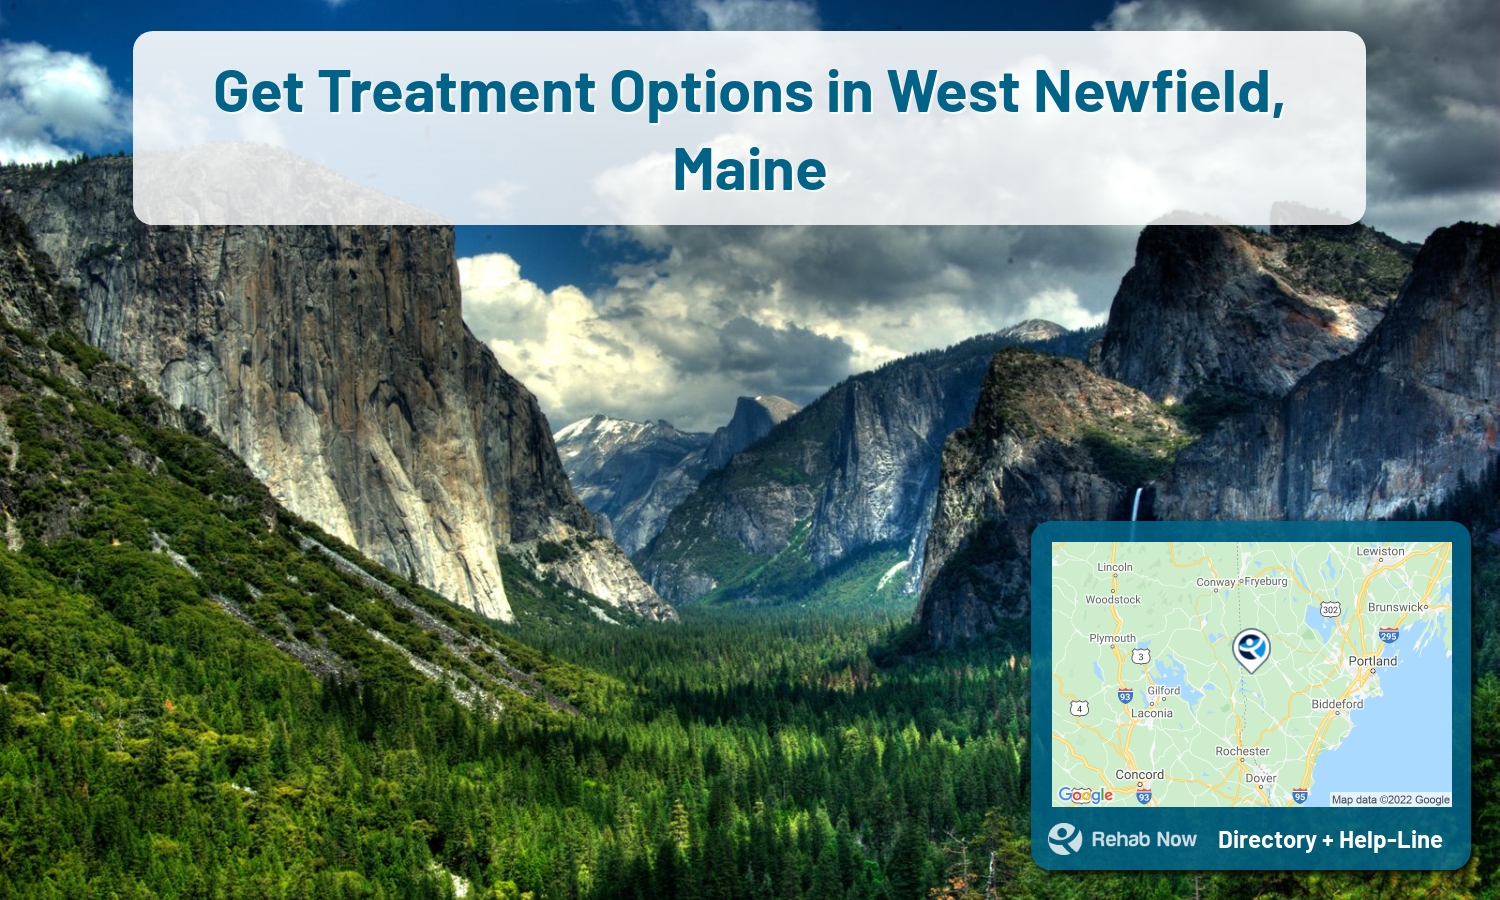 List of alcohol and drug treatment centers near you in West Newfield, Maine. Research certifications, programs, methods, pricing, and more.